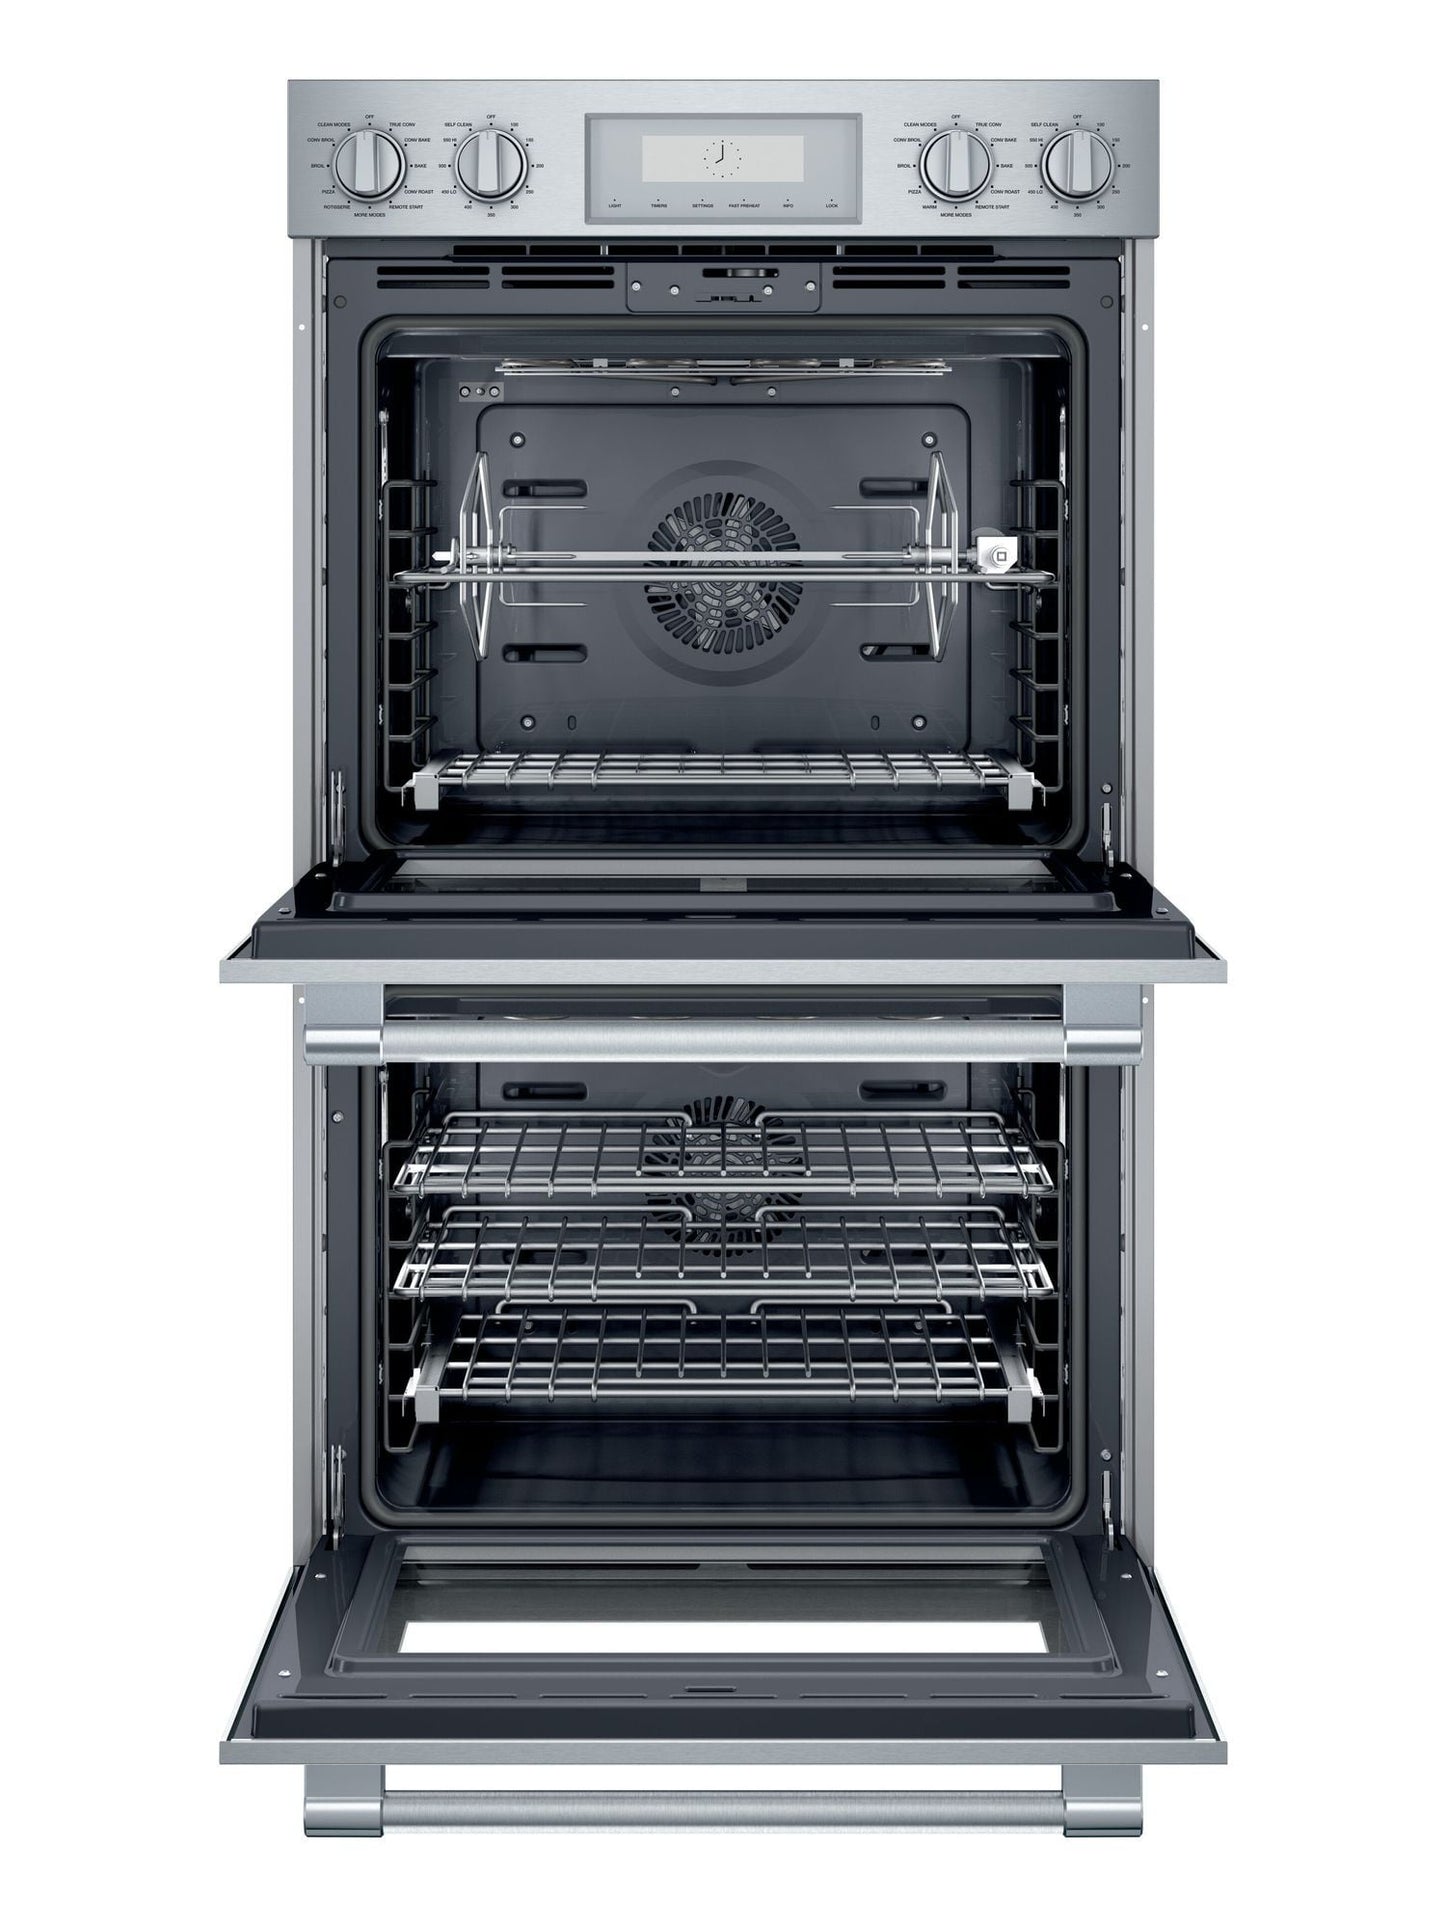 Thermador POD302W 30-Inch Professional Double Wall Oven